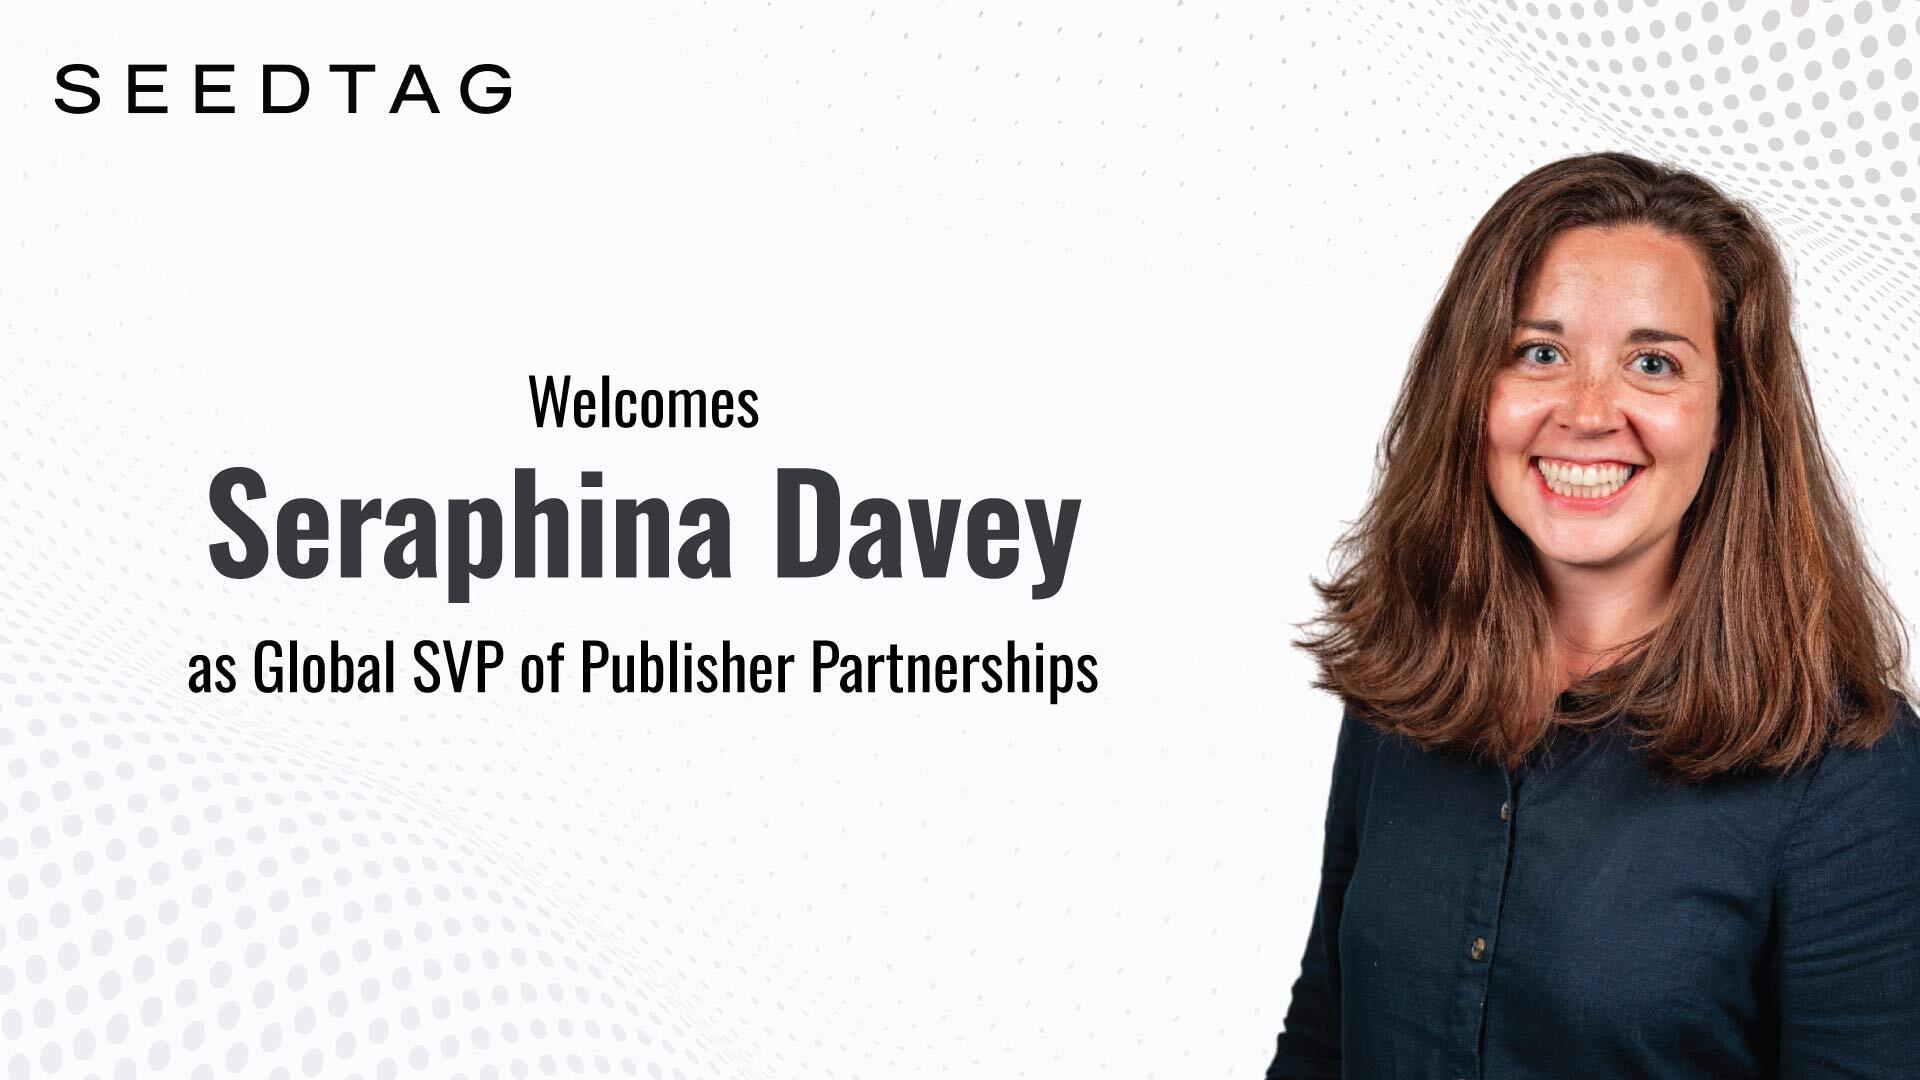 Seedtag Welcomes Seraphina Davey as Global SVP of Publisher Partnerships